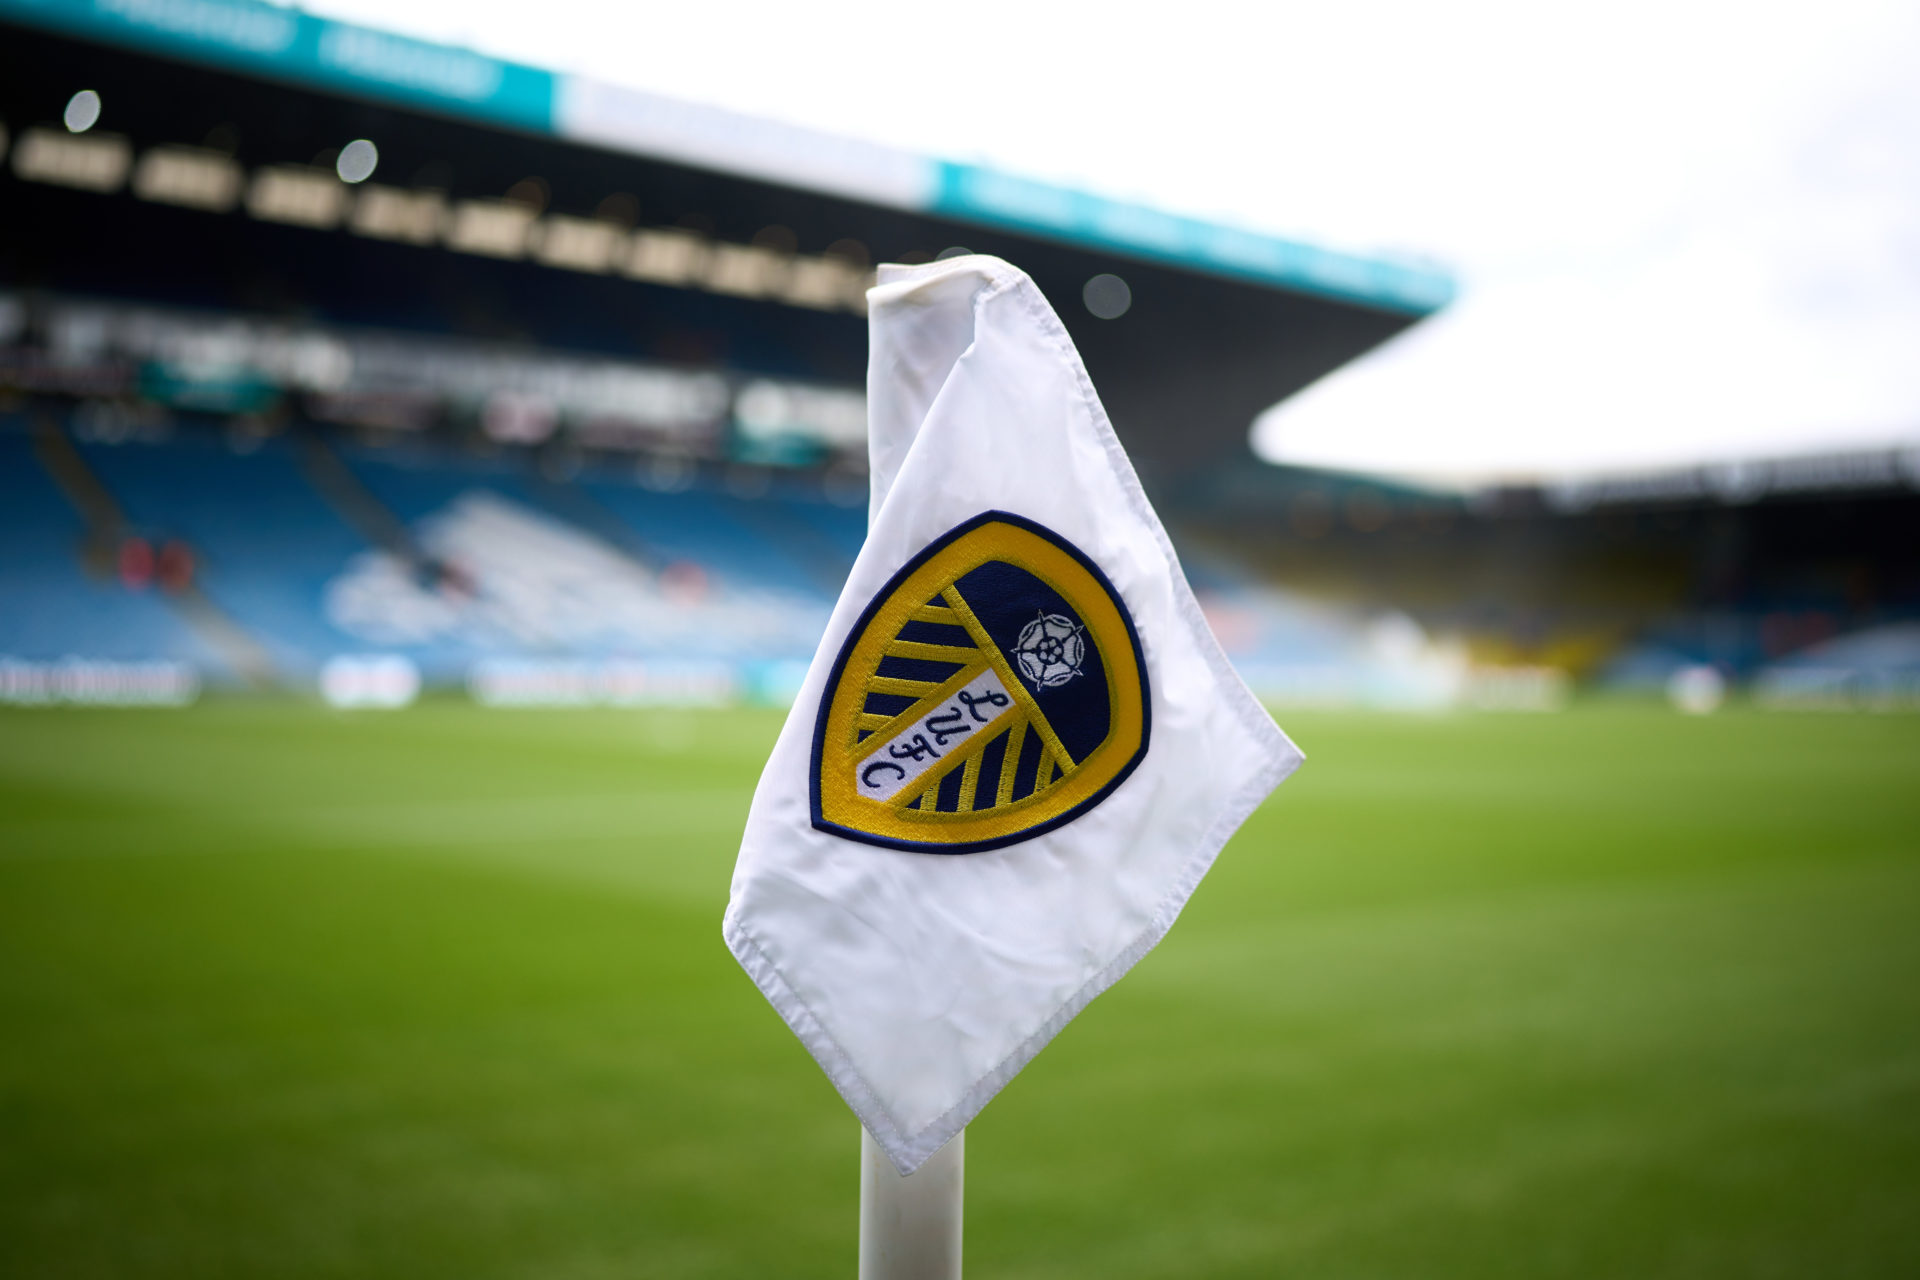 BIG BLOW: Leeds United Agree Deal to Join Championship Giant for £1.5 Million